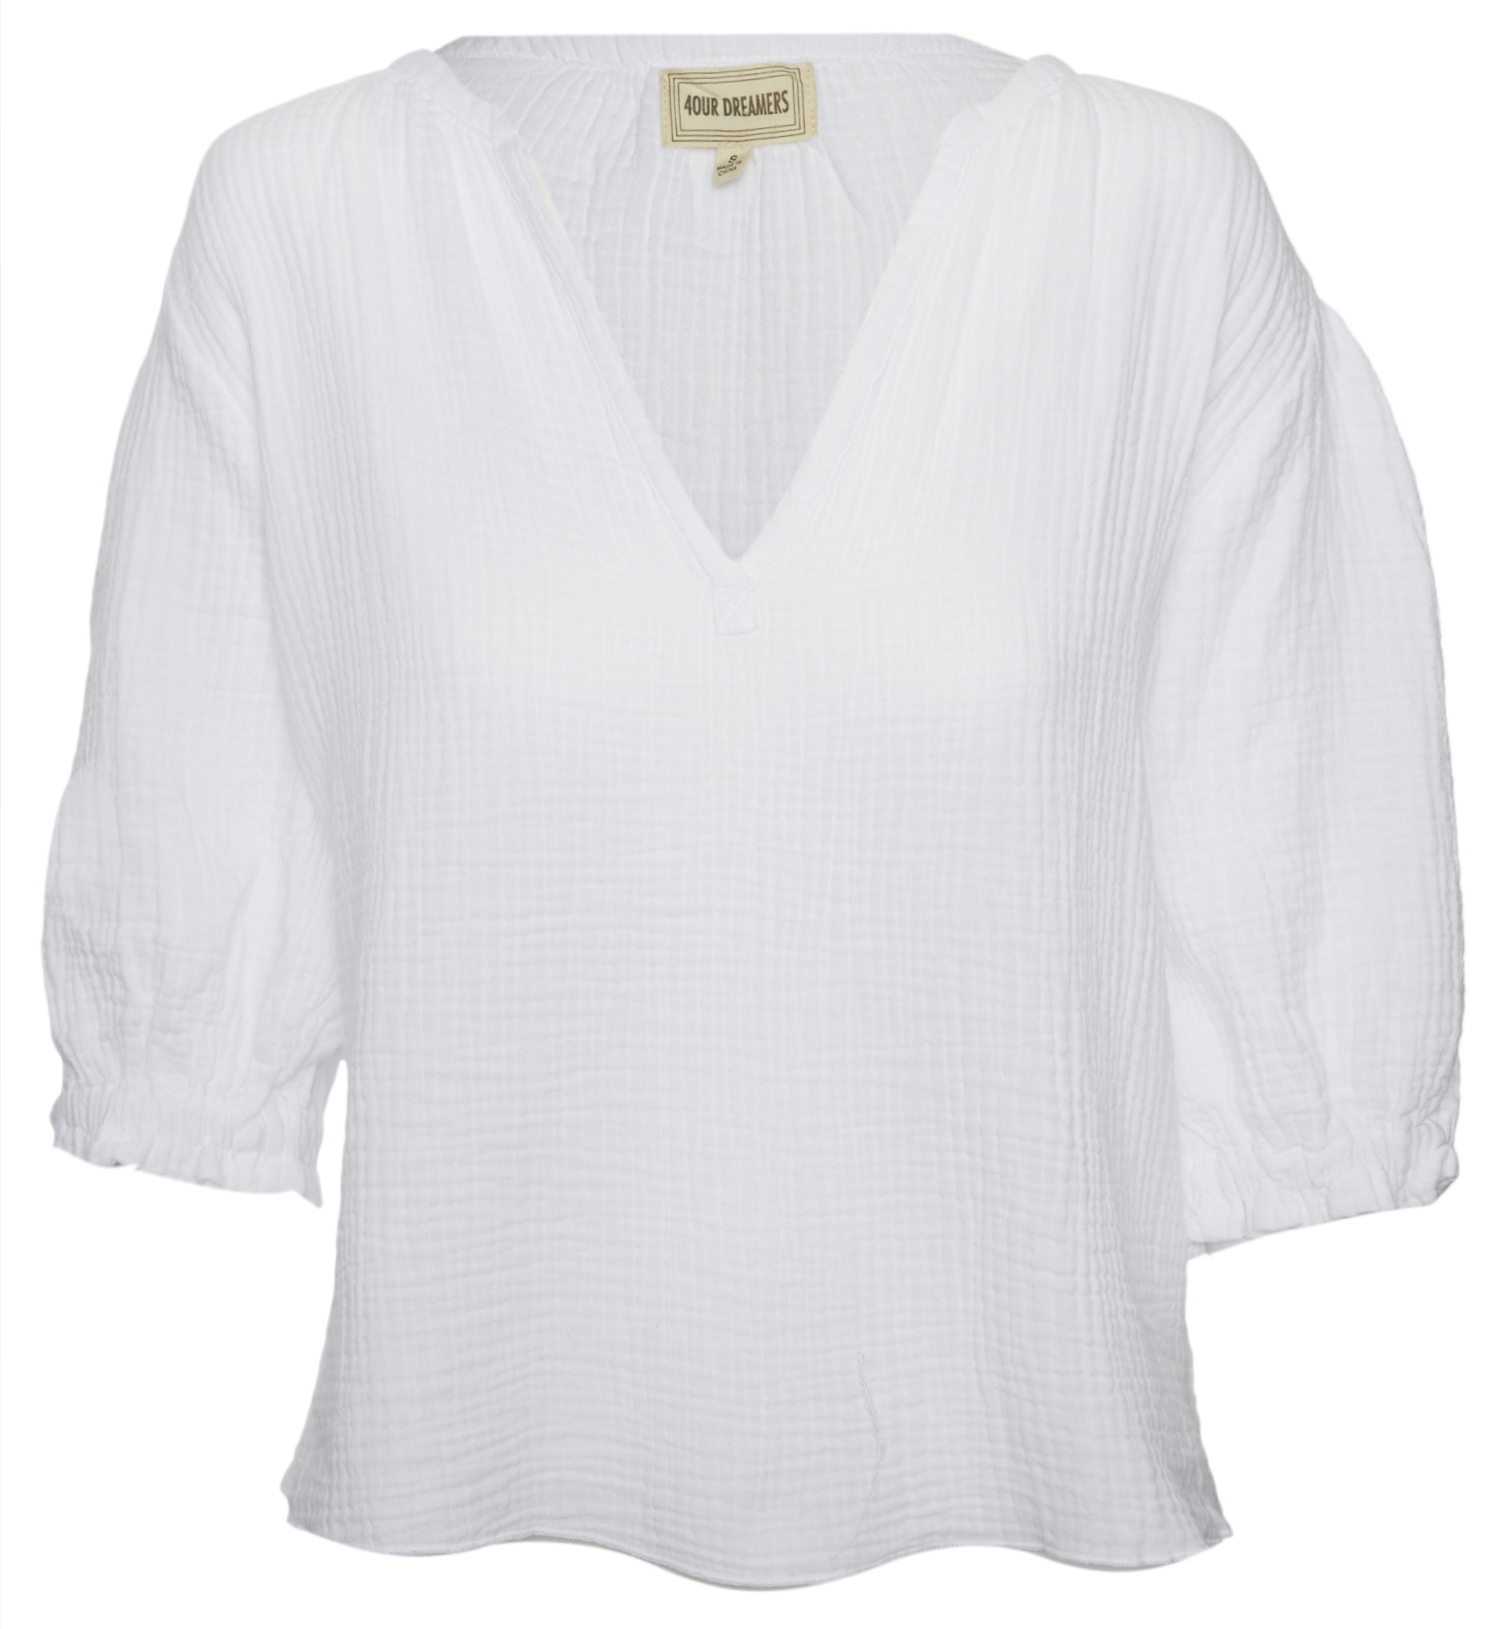 4 Our Dreamers V-Neck Blouse